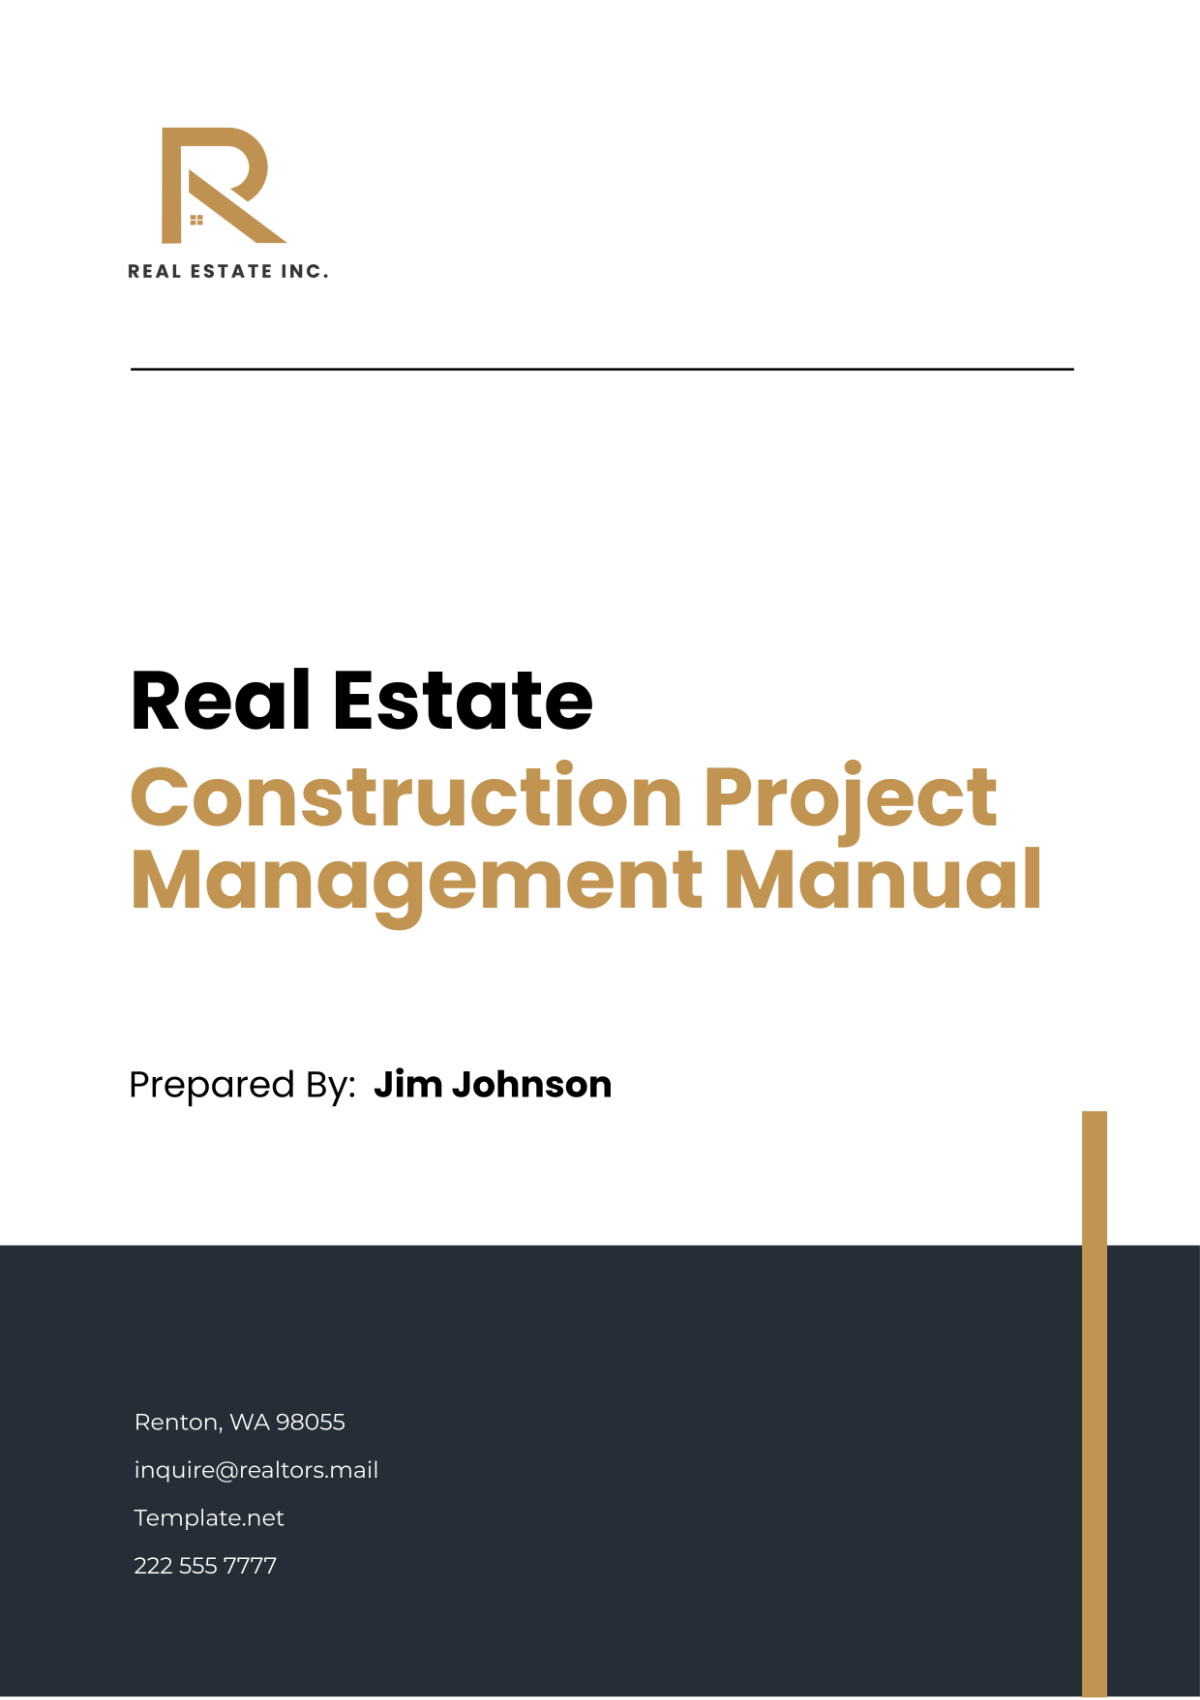 Real Estate Construction Project Management Manual Template